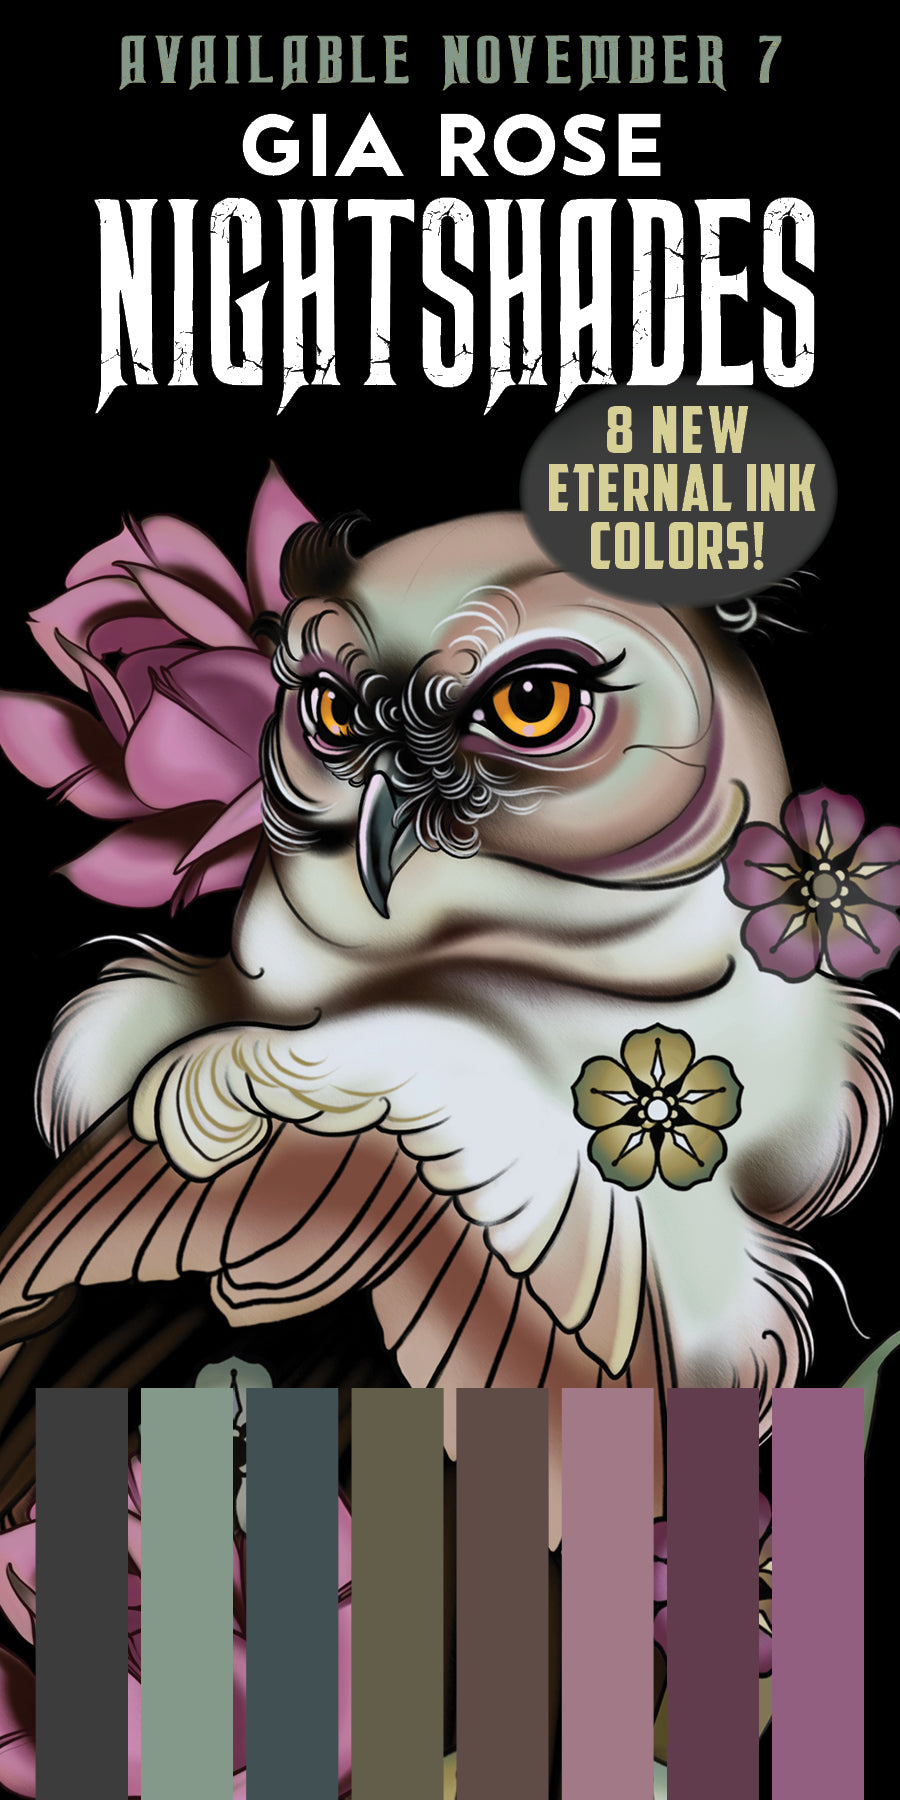 Clear Cut Transparent Thermal Transfer Paper - Eternal Tattoo Supply